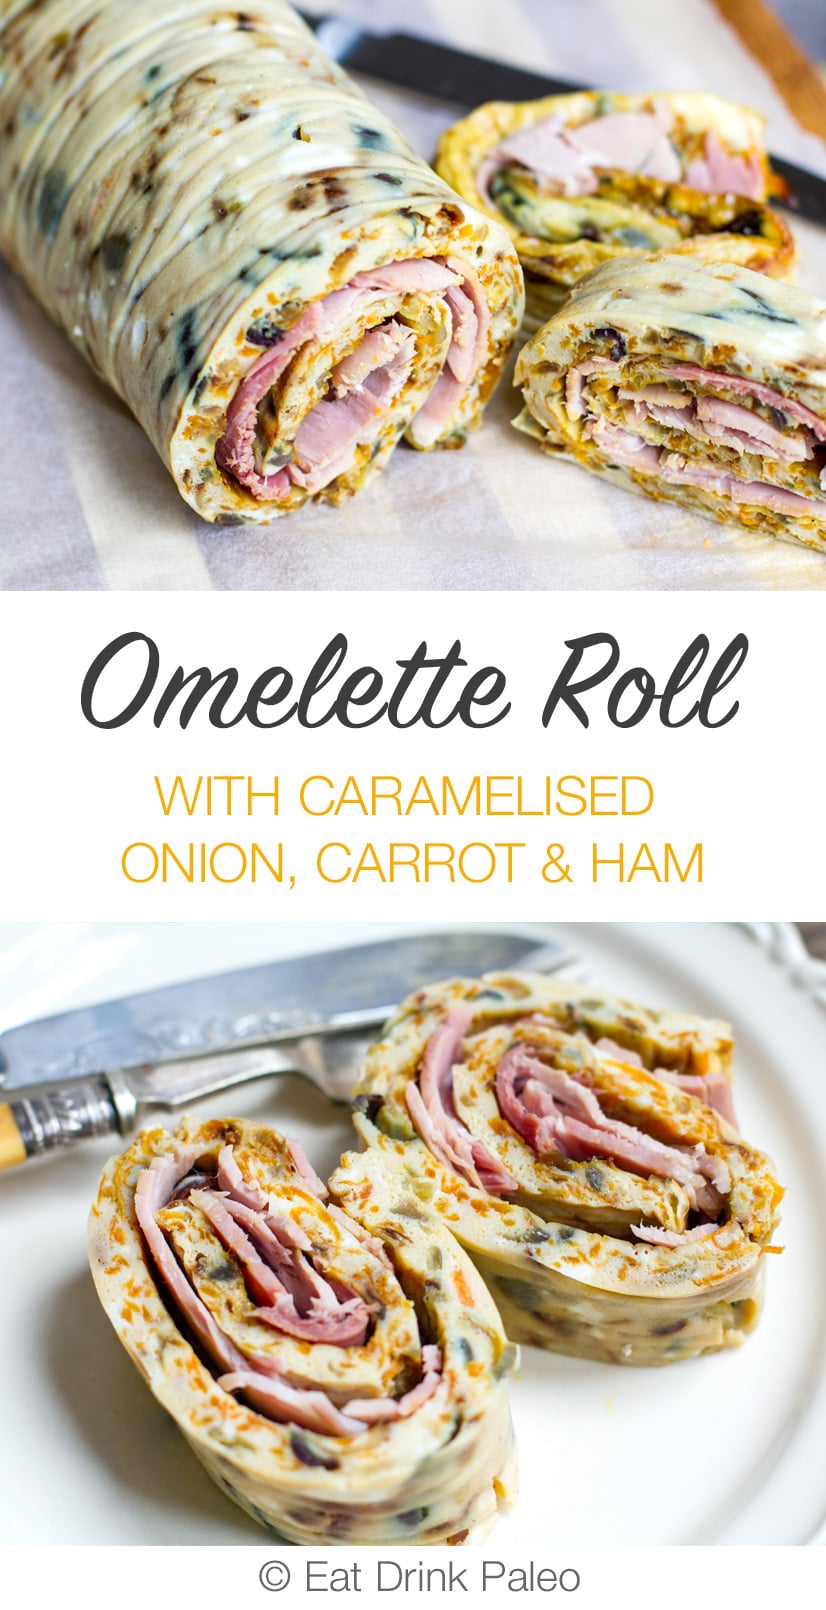 Caramelised Onion & Carrot Omelette Roll Recipe With Ham (Paleo & GF)